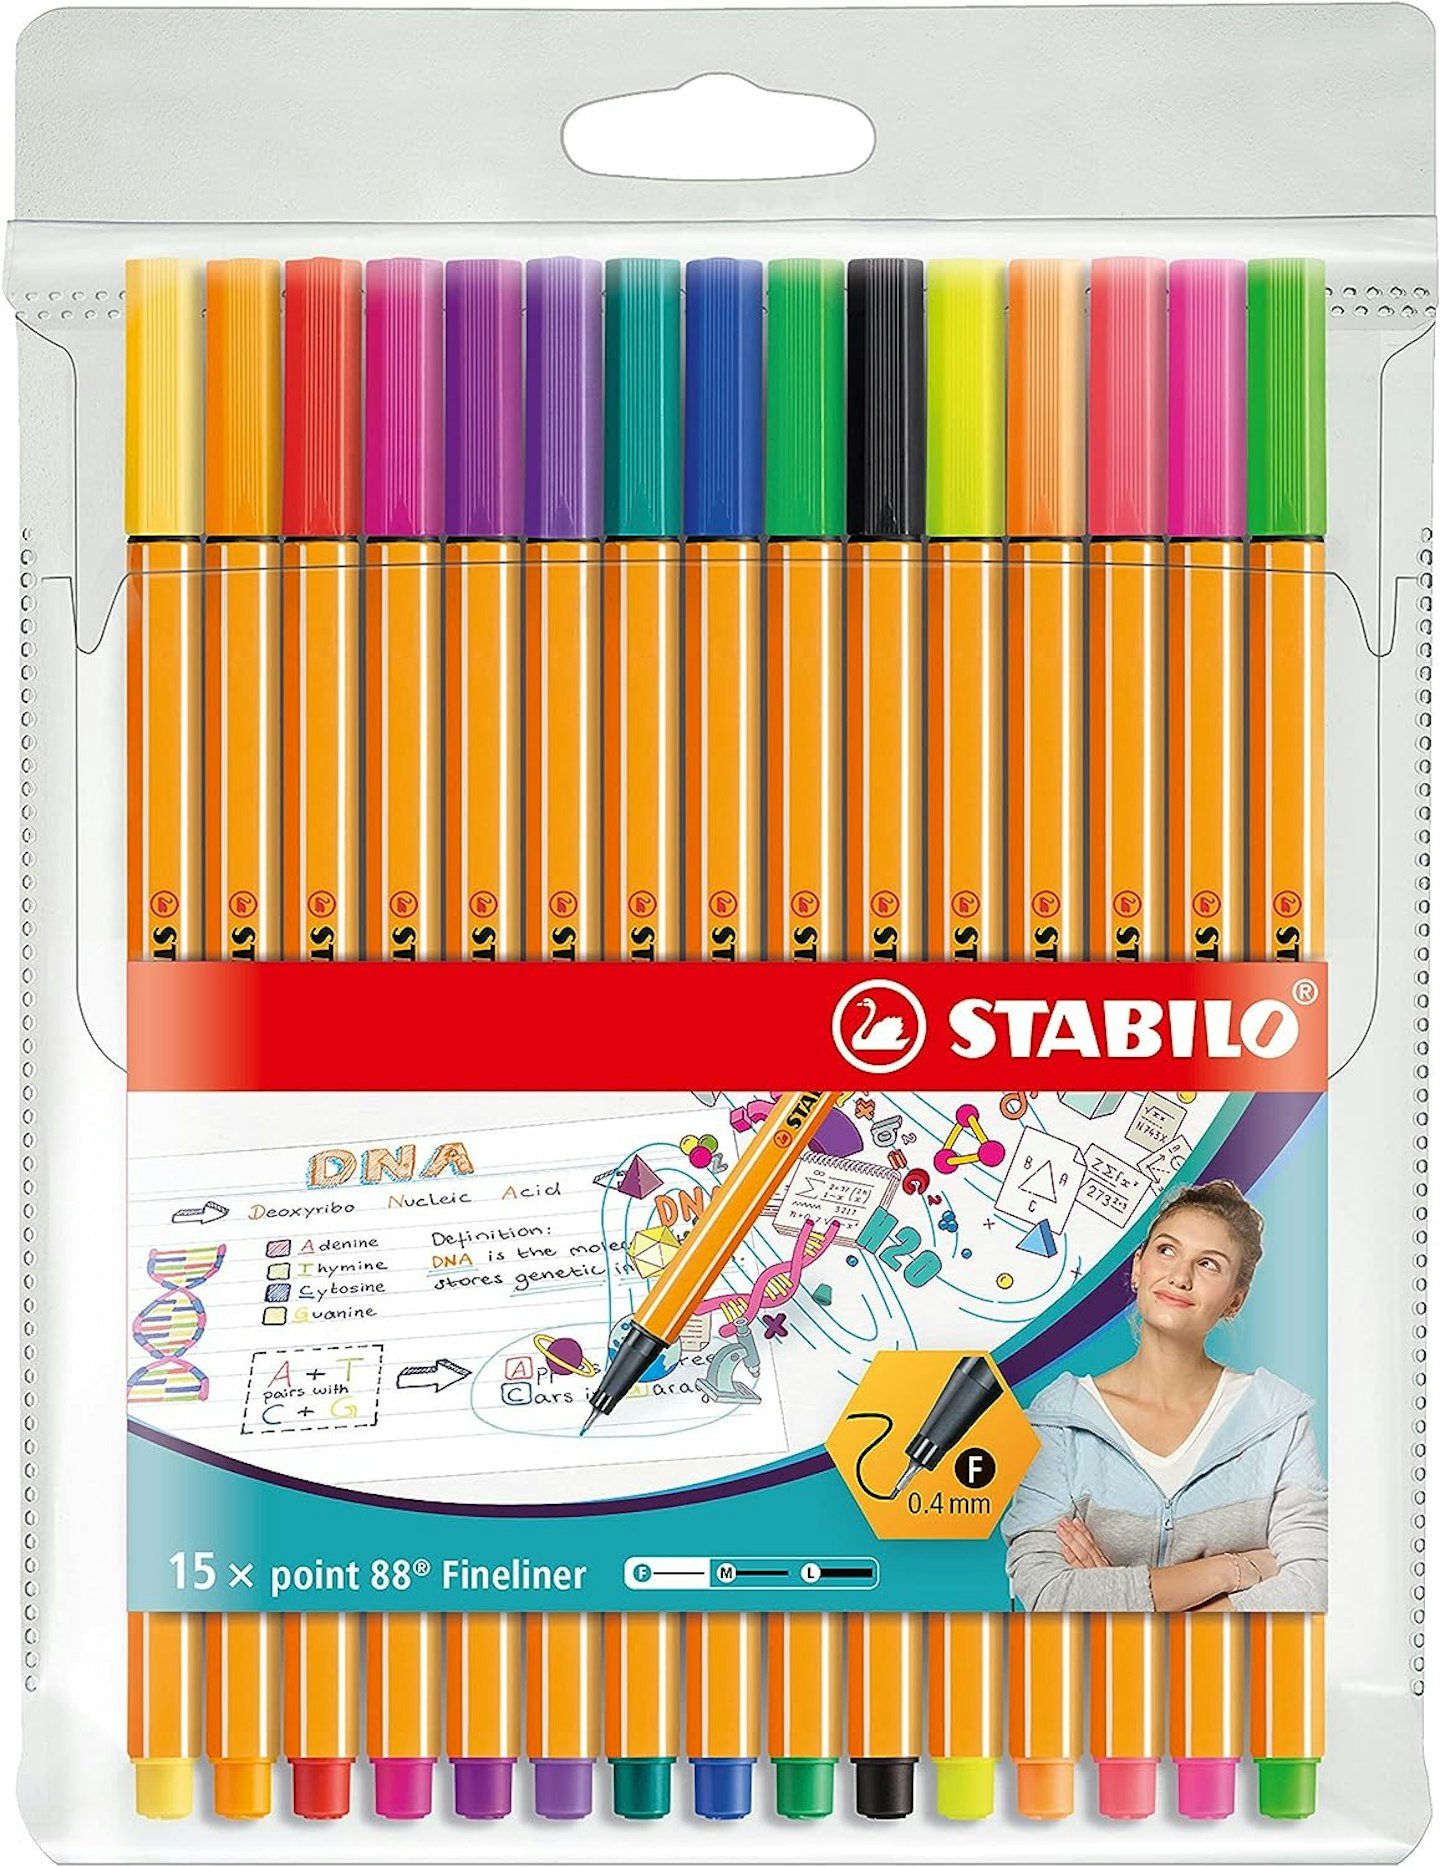 Fineliner STABILO point 88, Pack of 15